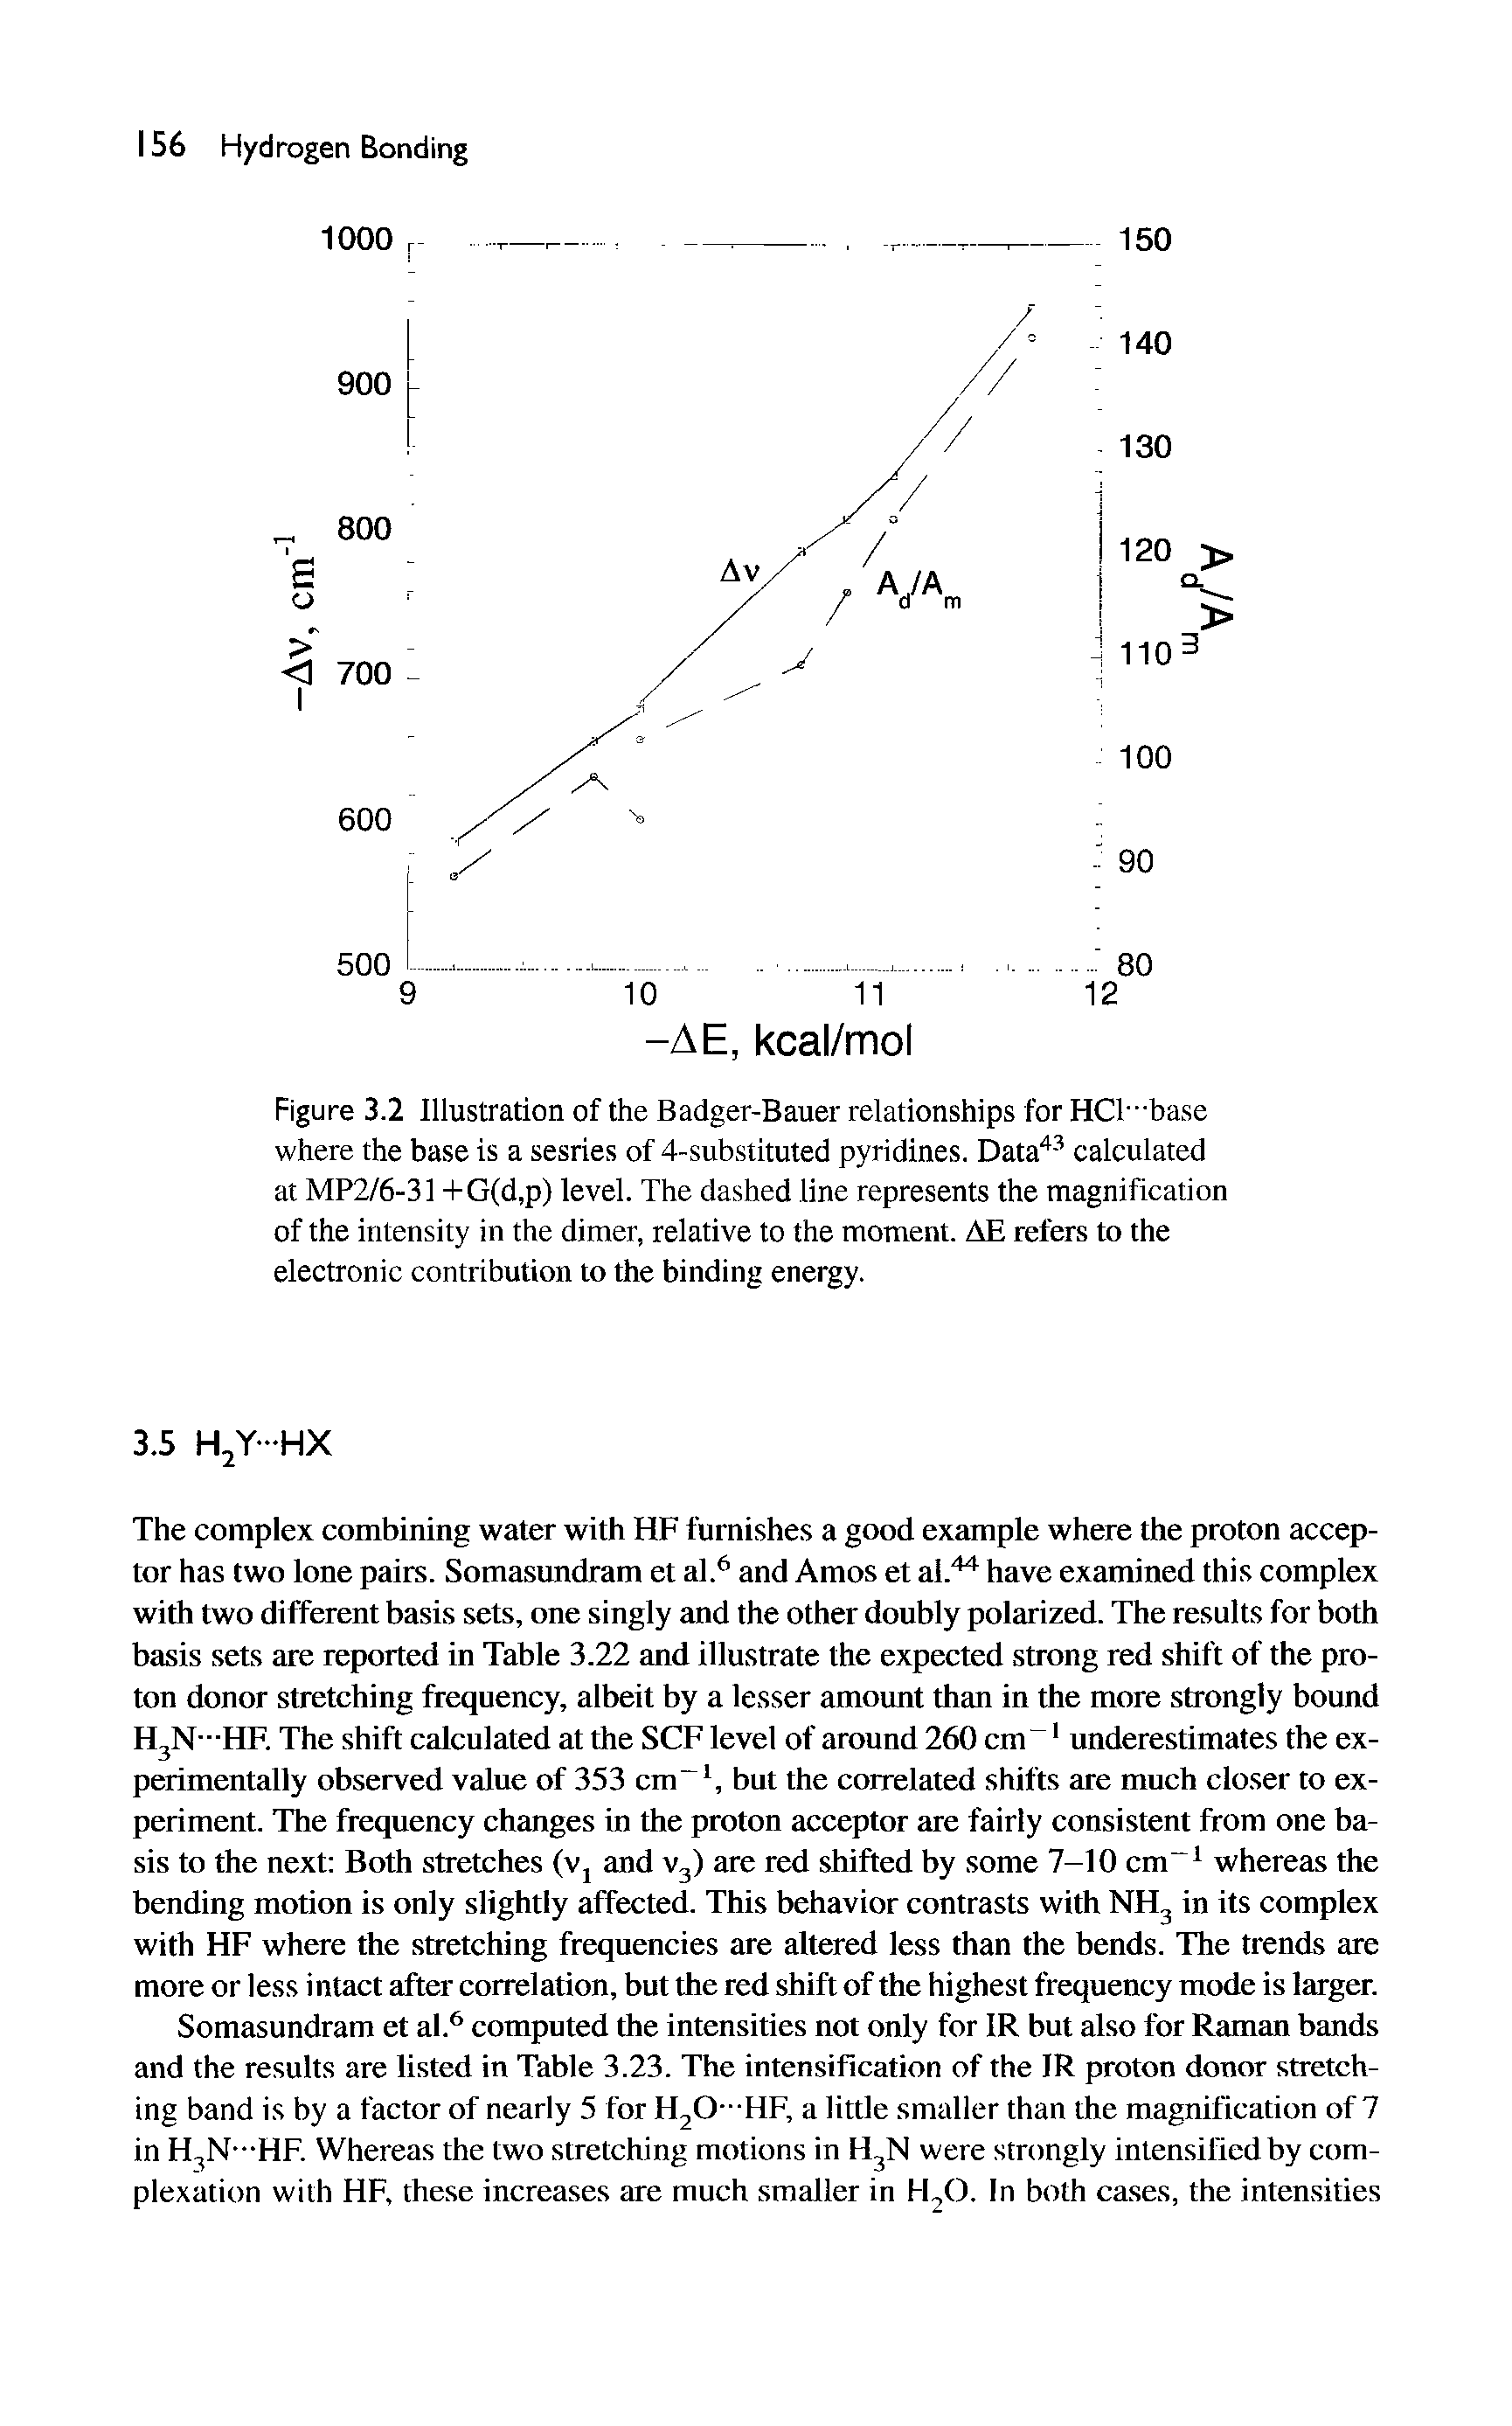 Figure 3.2 Illustration of the Badger-Bauer relationships for HCl" base where the base is a sesries of 4-substituted pyridines. Data - calculated at MP2/6-31 +G(d,p) level. The dashed line represents the magnification of the intensity in the dimer, relative to the moment. AE refers to the electronic contribution to the binding energy.